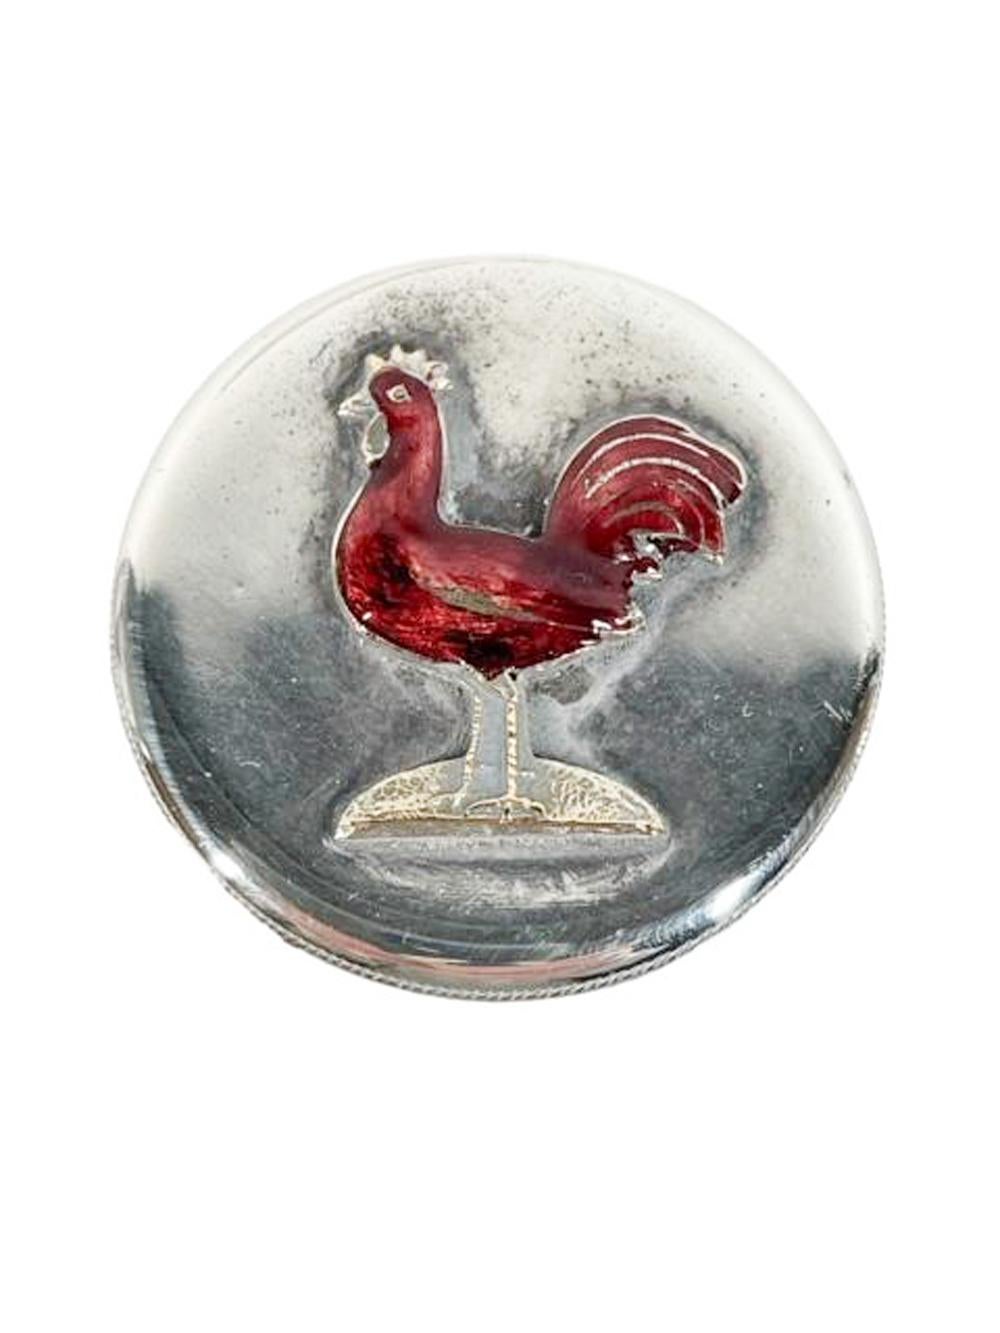 Art Deco Silver Plate Handled Cocktail Shaker with Enameled Rooster on Lid For Sale 5